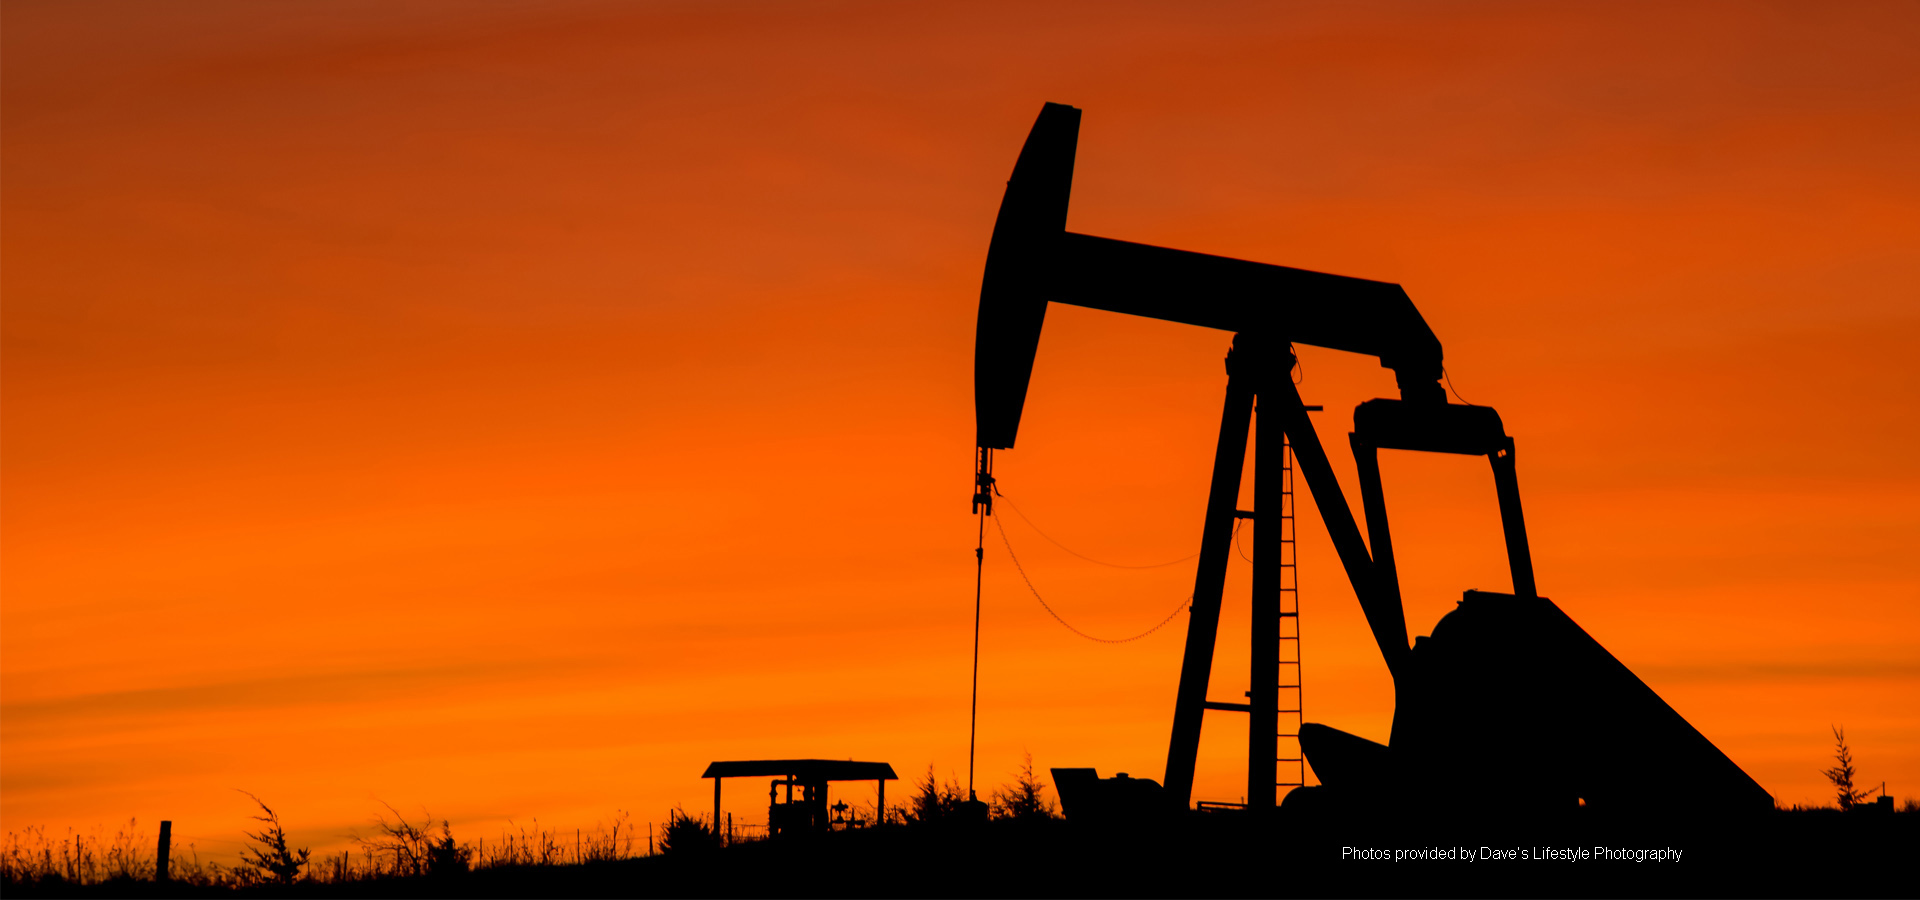 PumpJack Image by Dave’s Lifestyle Photography